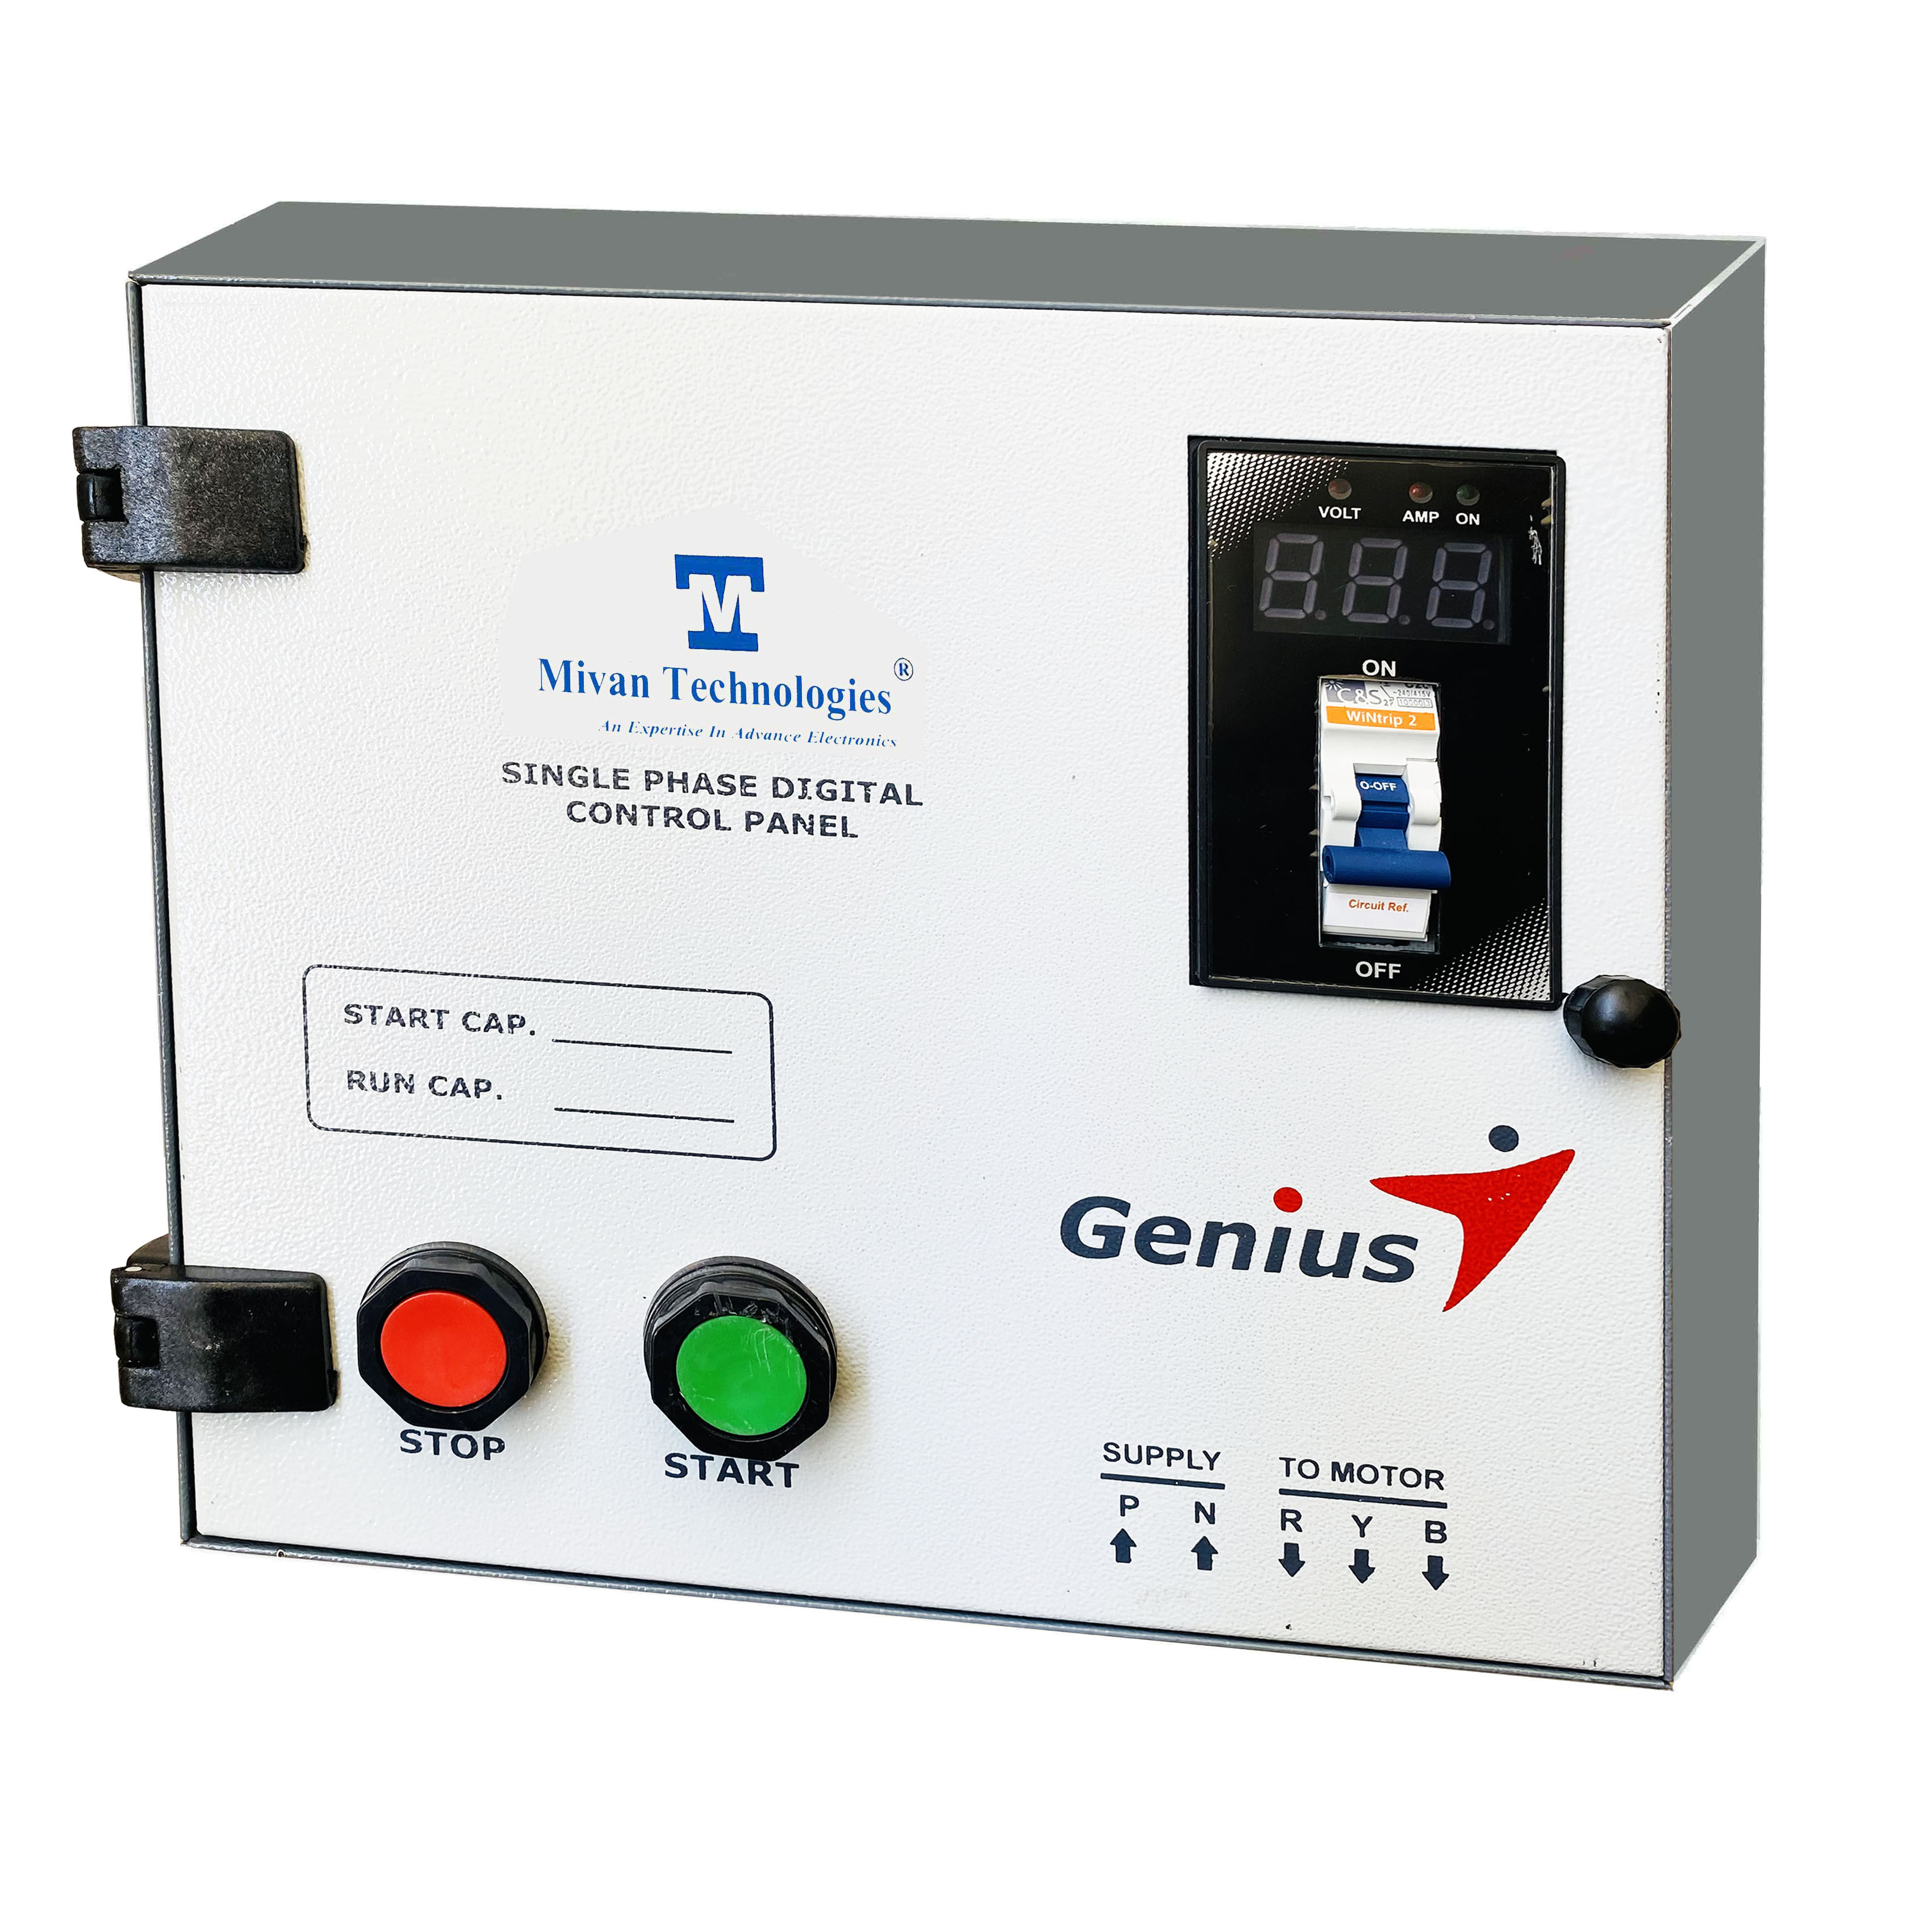 DMPS SR 1.5 HP Single phase Digital starter with BCH contactor with digital volt and amp meter and MCB start and run capacitor